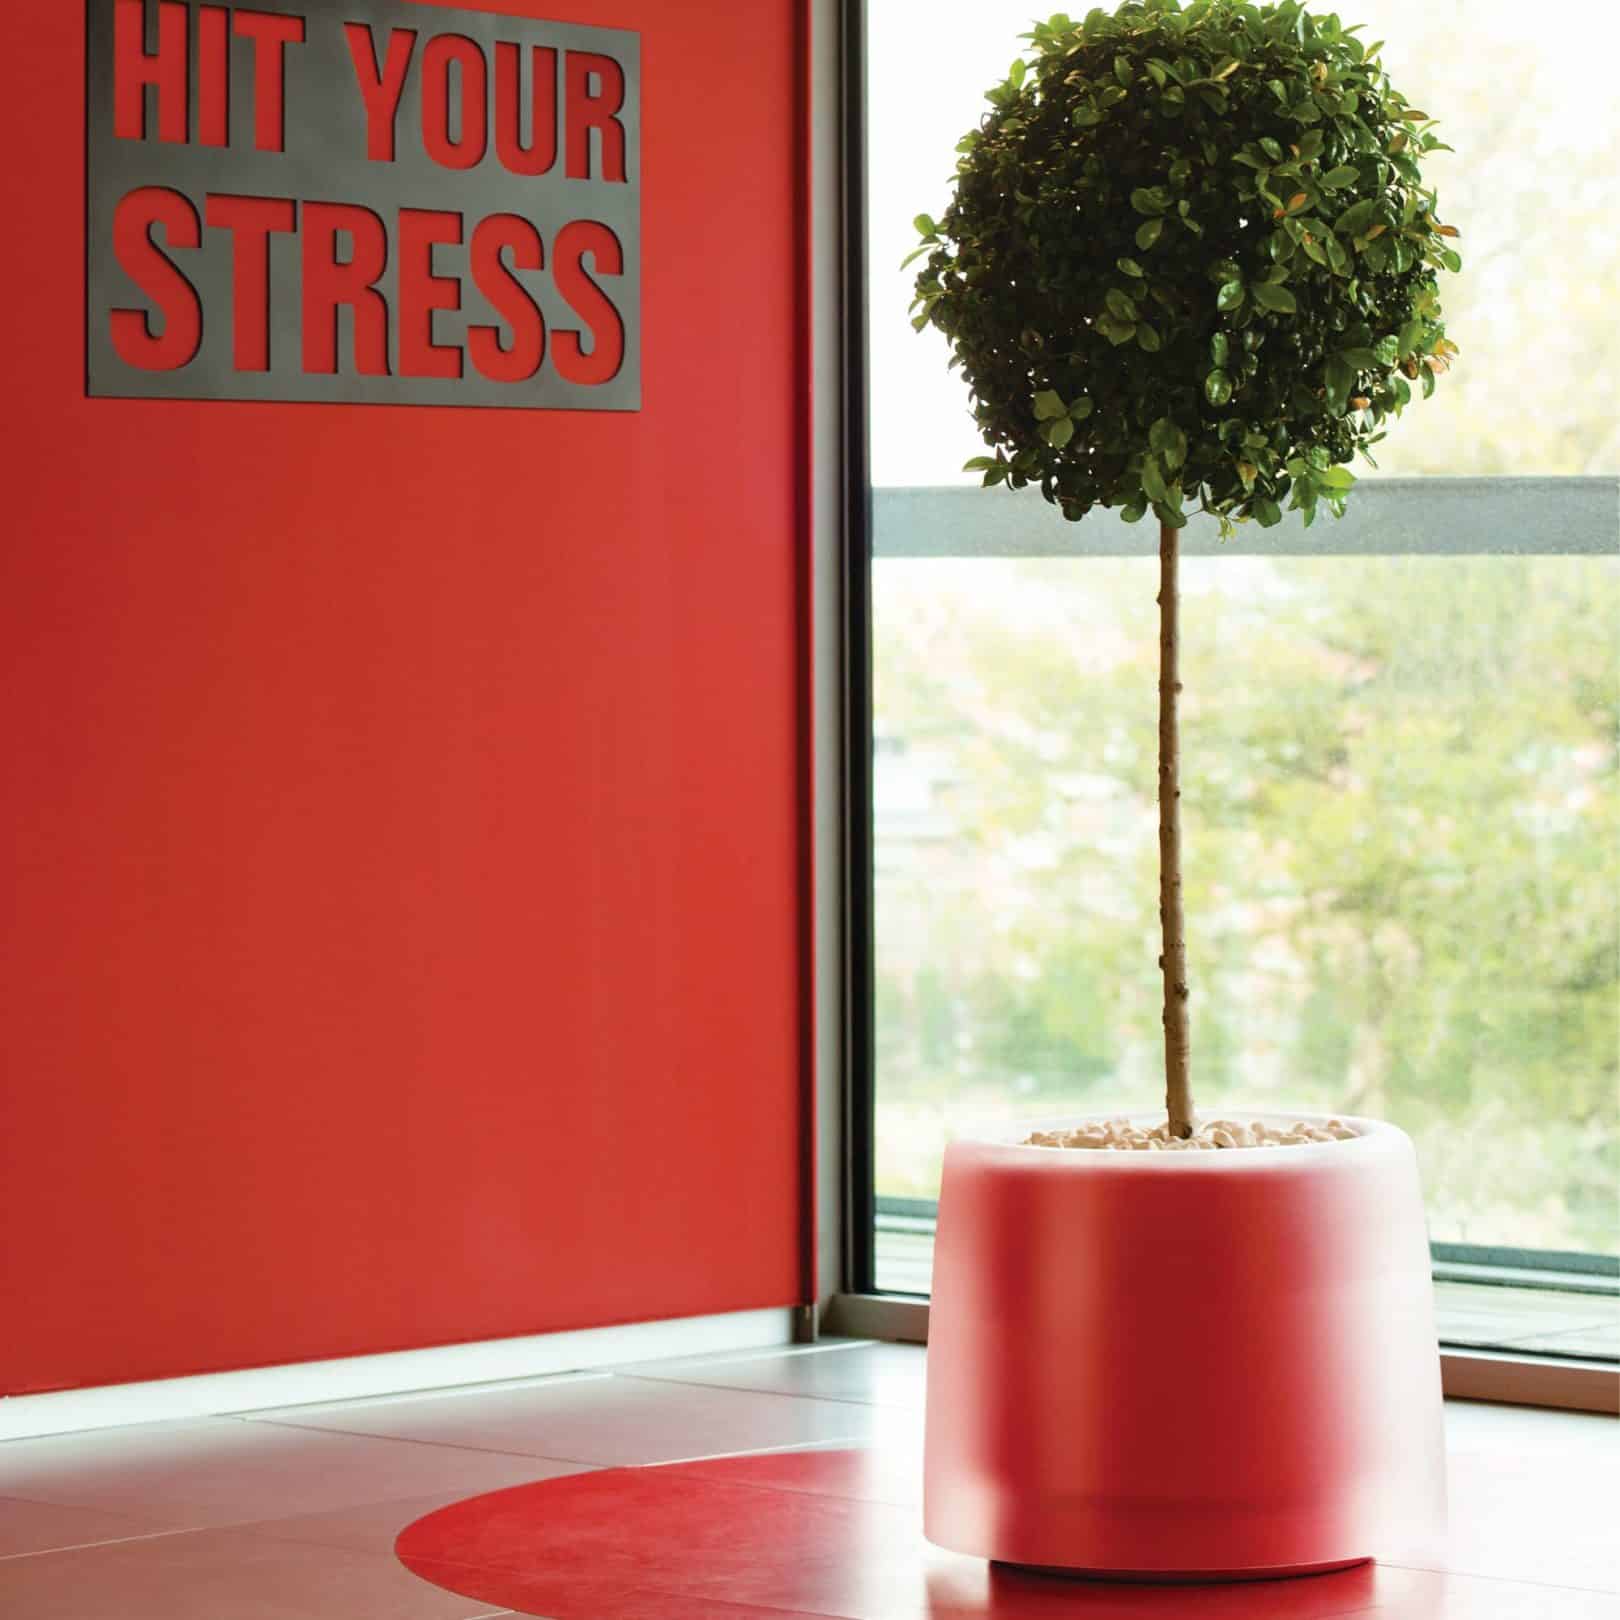 Lux red planter in office entrance